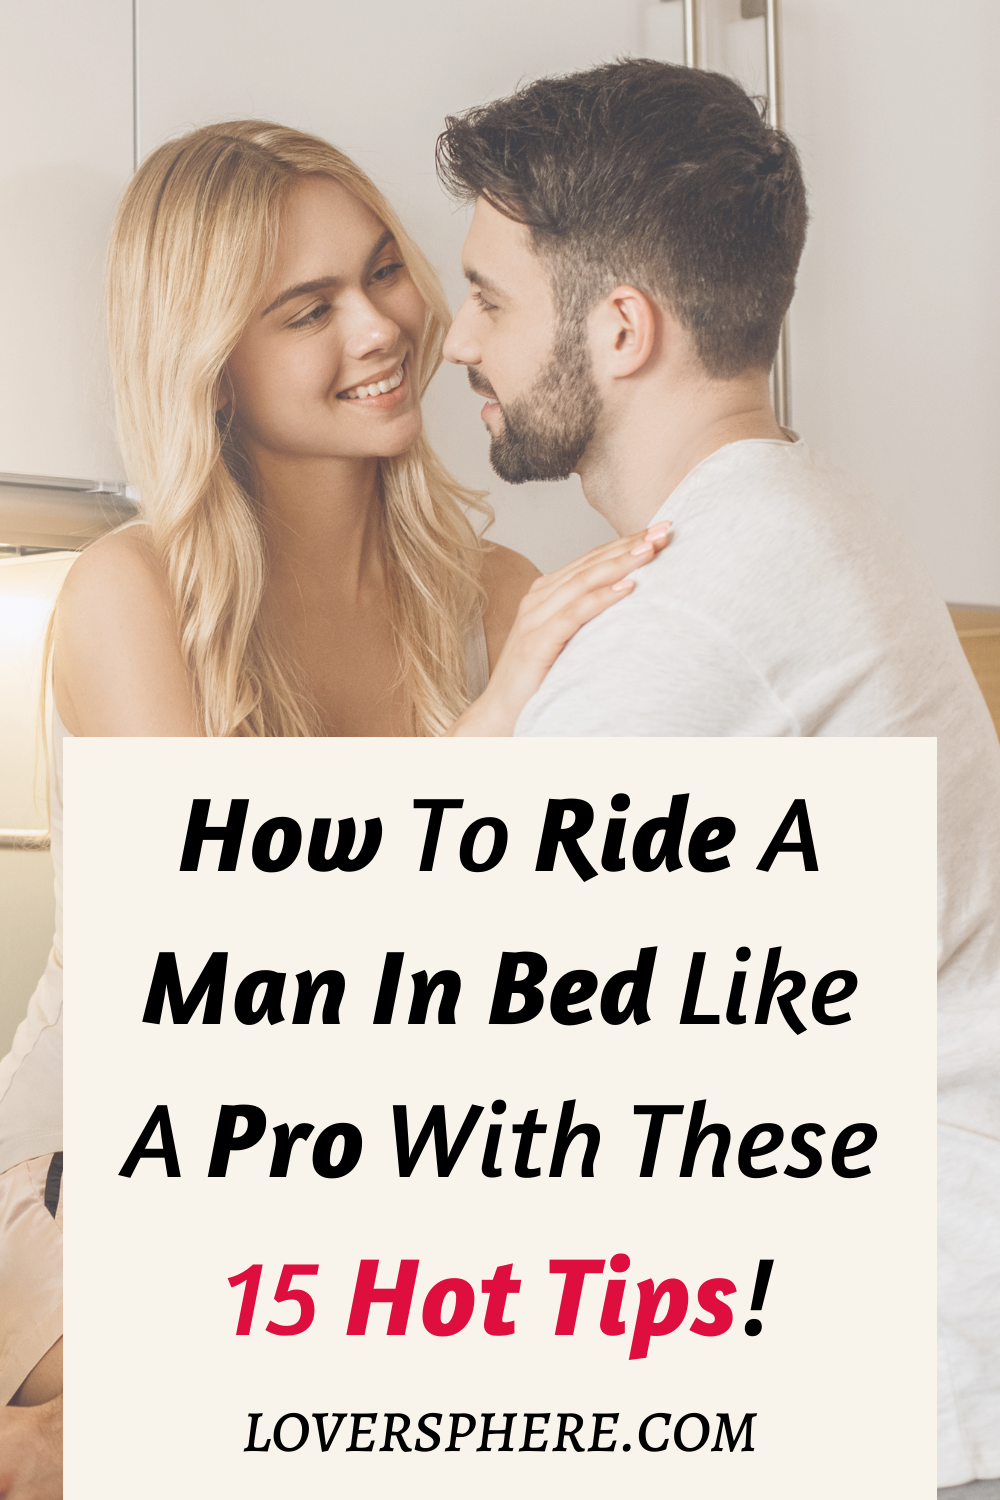 caroline elrod recommends How To Ride A Guy During Sex